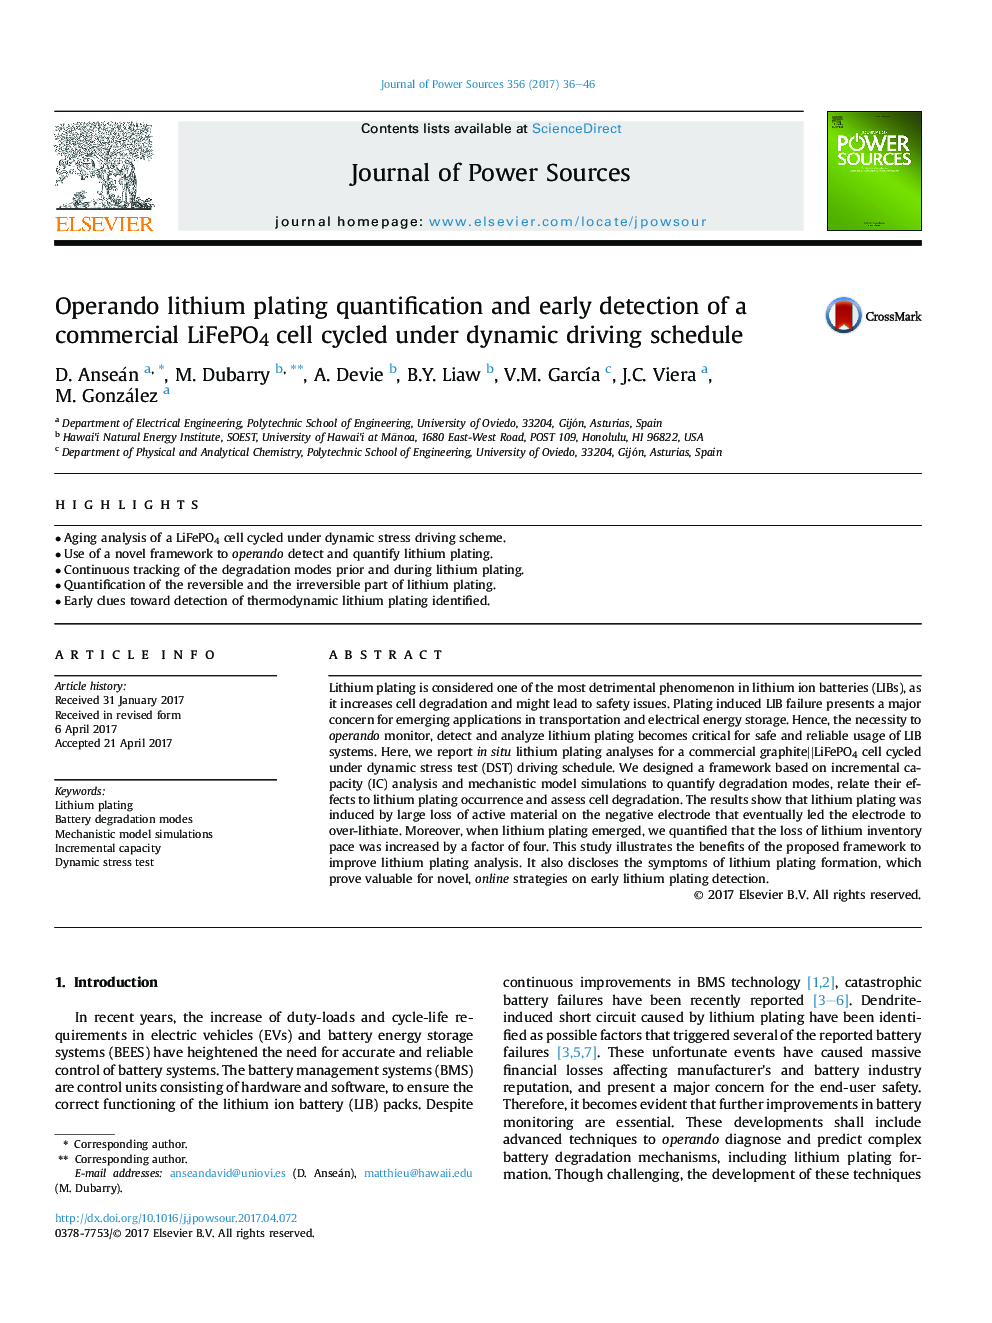 Operando lithium plating quantification and early detection of a commercial LiFePO4 cell cycled under dynamic driving schedule